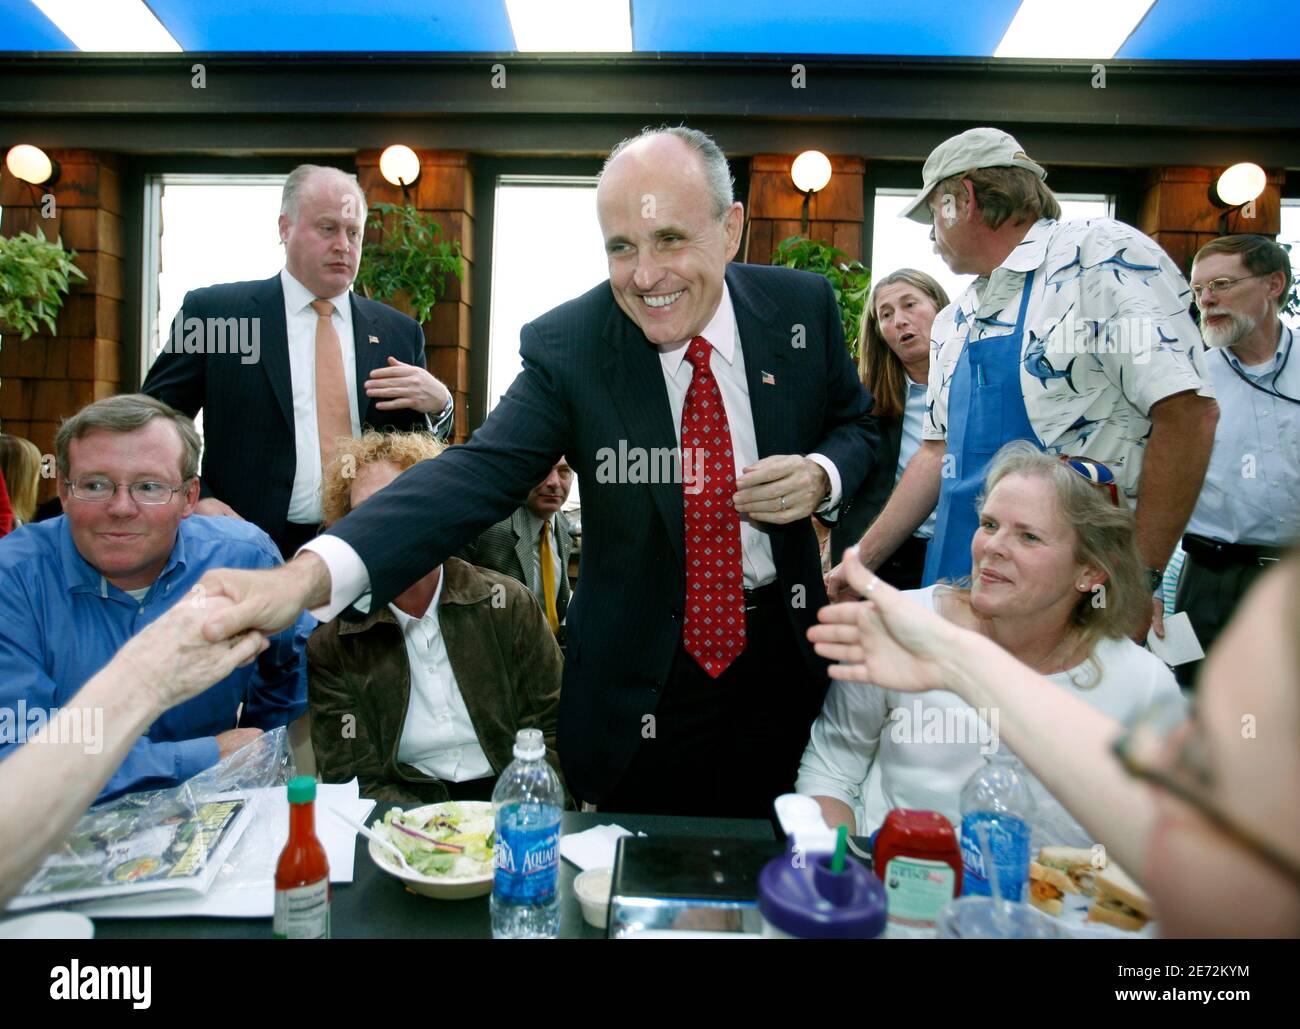 Former New York Mayor Rudy Giuliani greets people enjoying lunch at Point Loma Seafoods during a vist to San Diego, California  as part of his Presidential Exploratory Committee March 6, 2007.  REUTERS/Mike Blake (UNITED STATES) Stock Photo